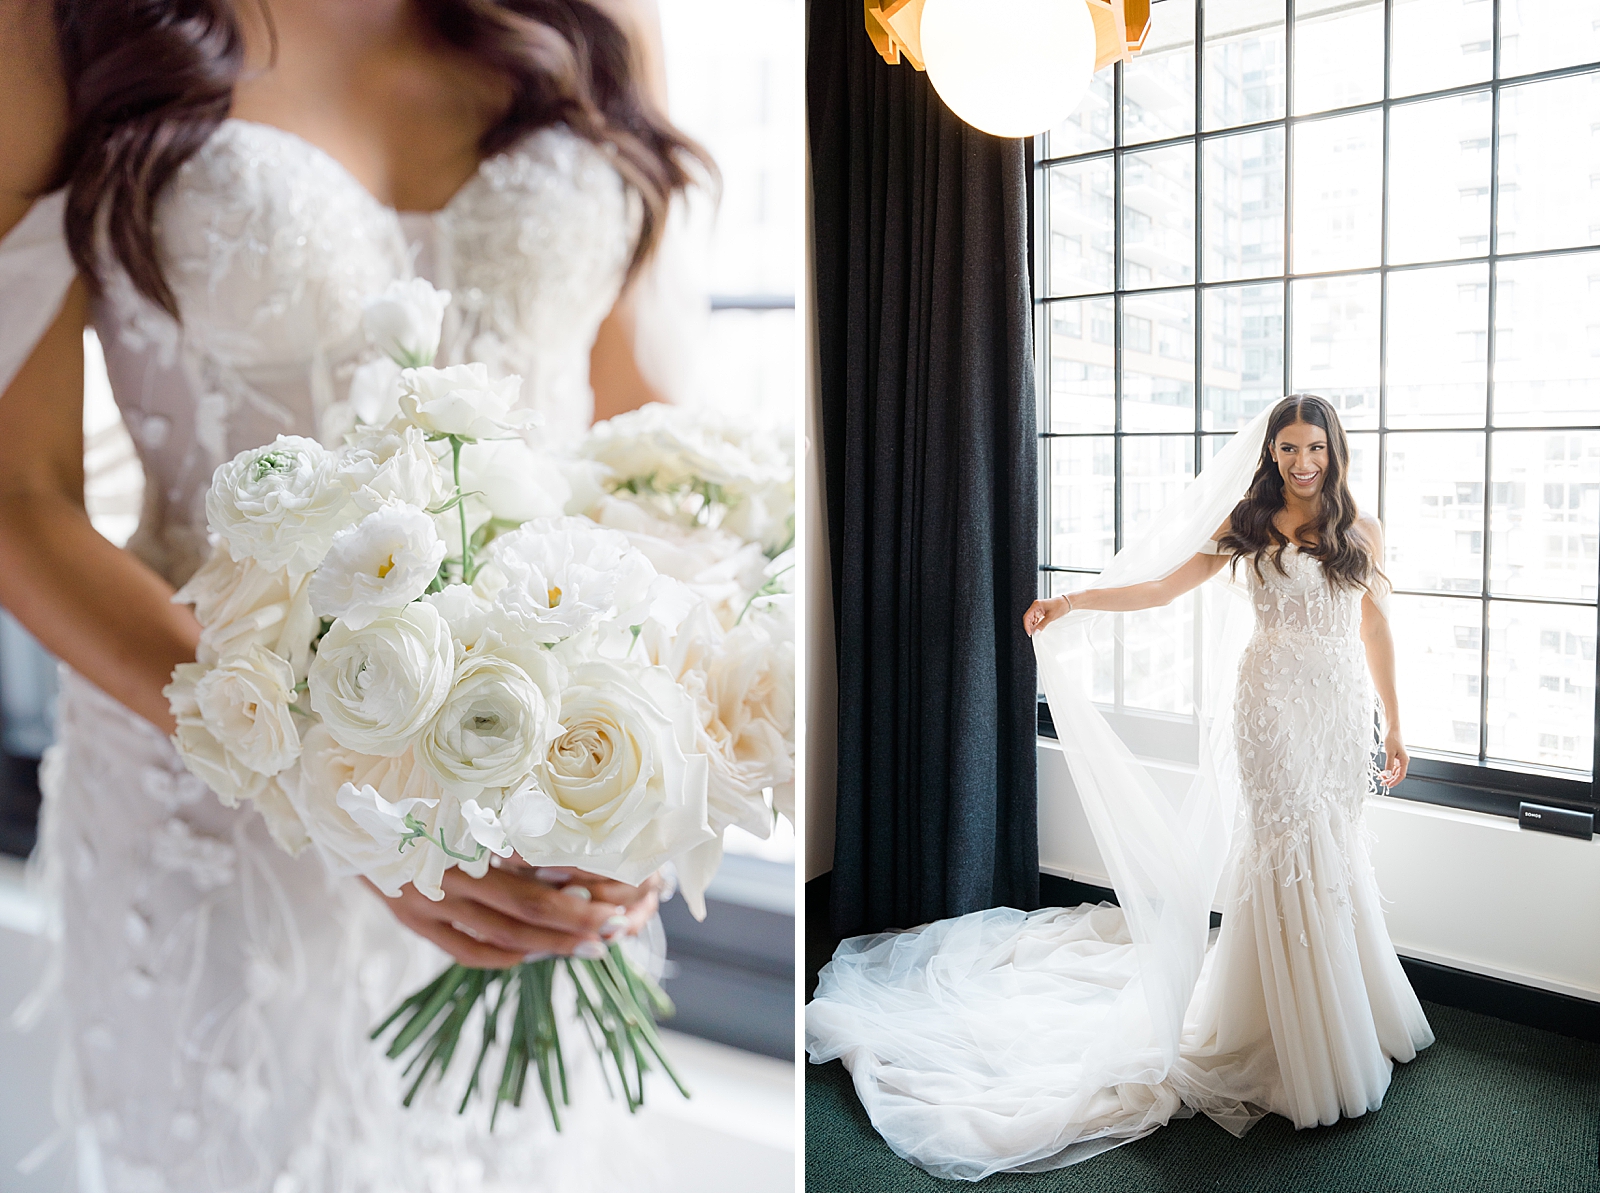 Left photo: Close up shot of the bride holding her bouquet. 
Right photo: The bride smiling as she shows off her wedding gown. 